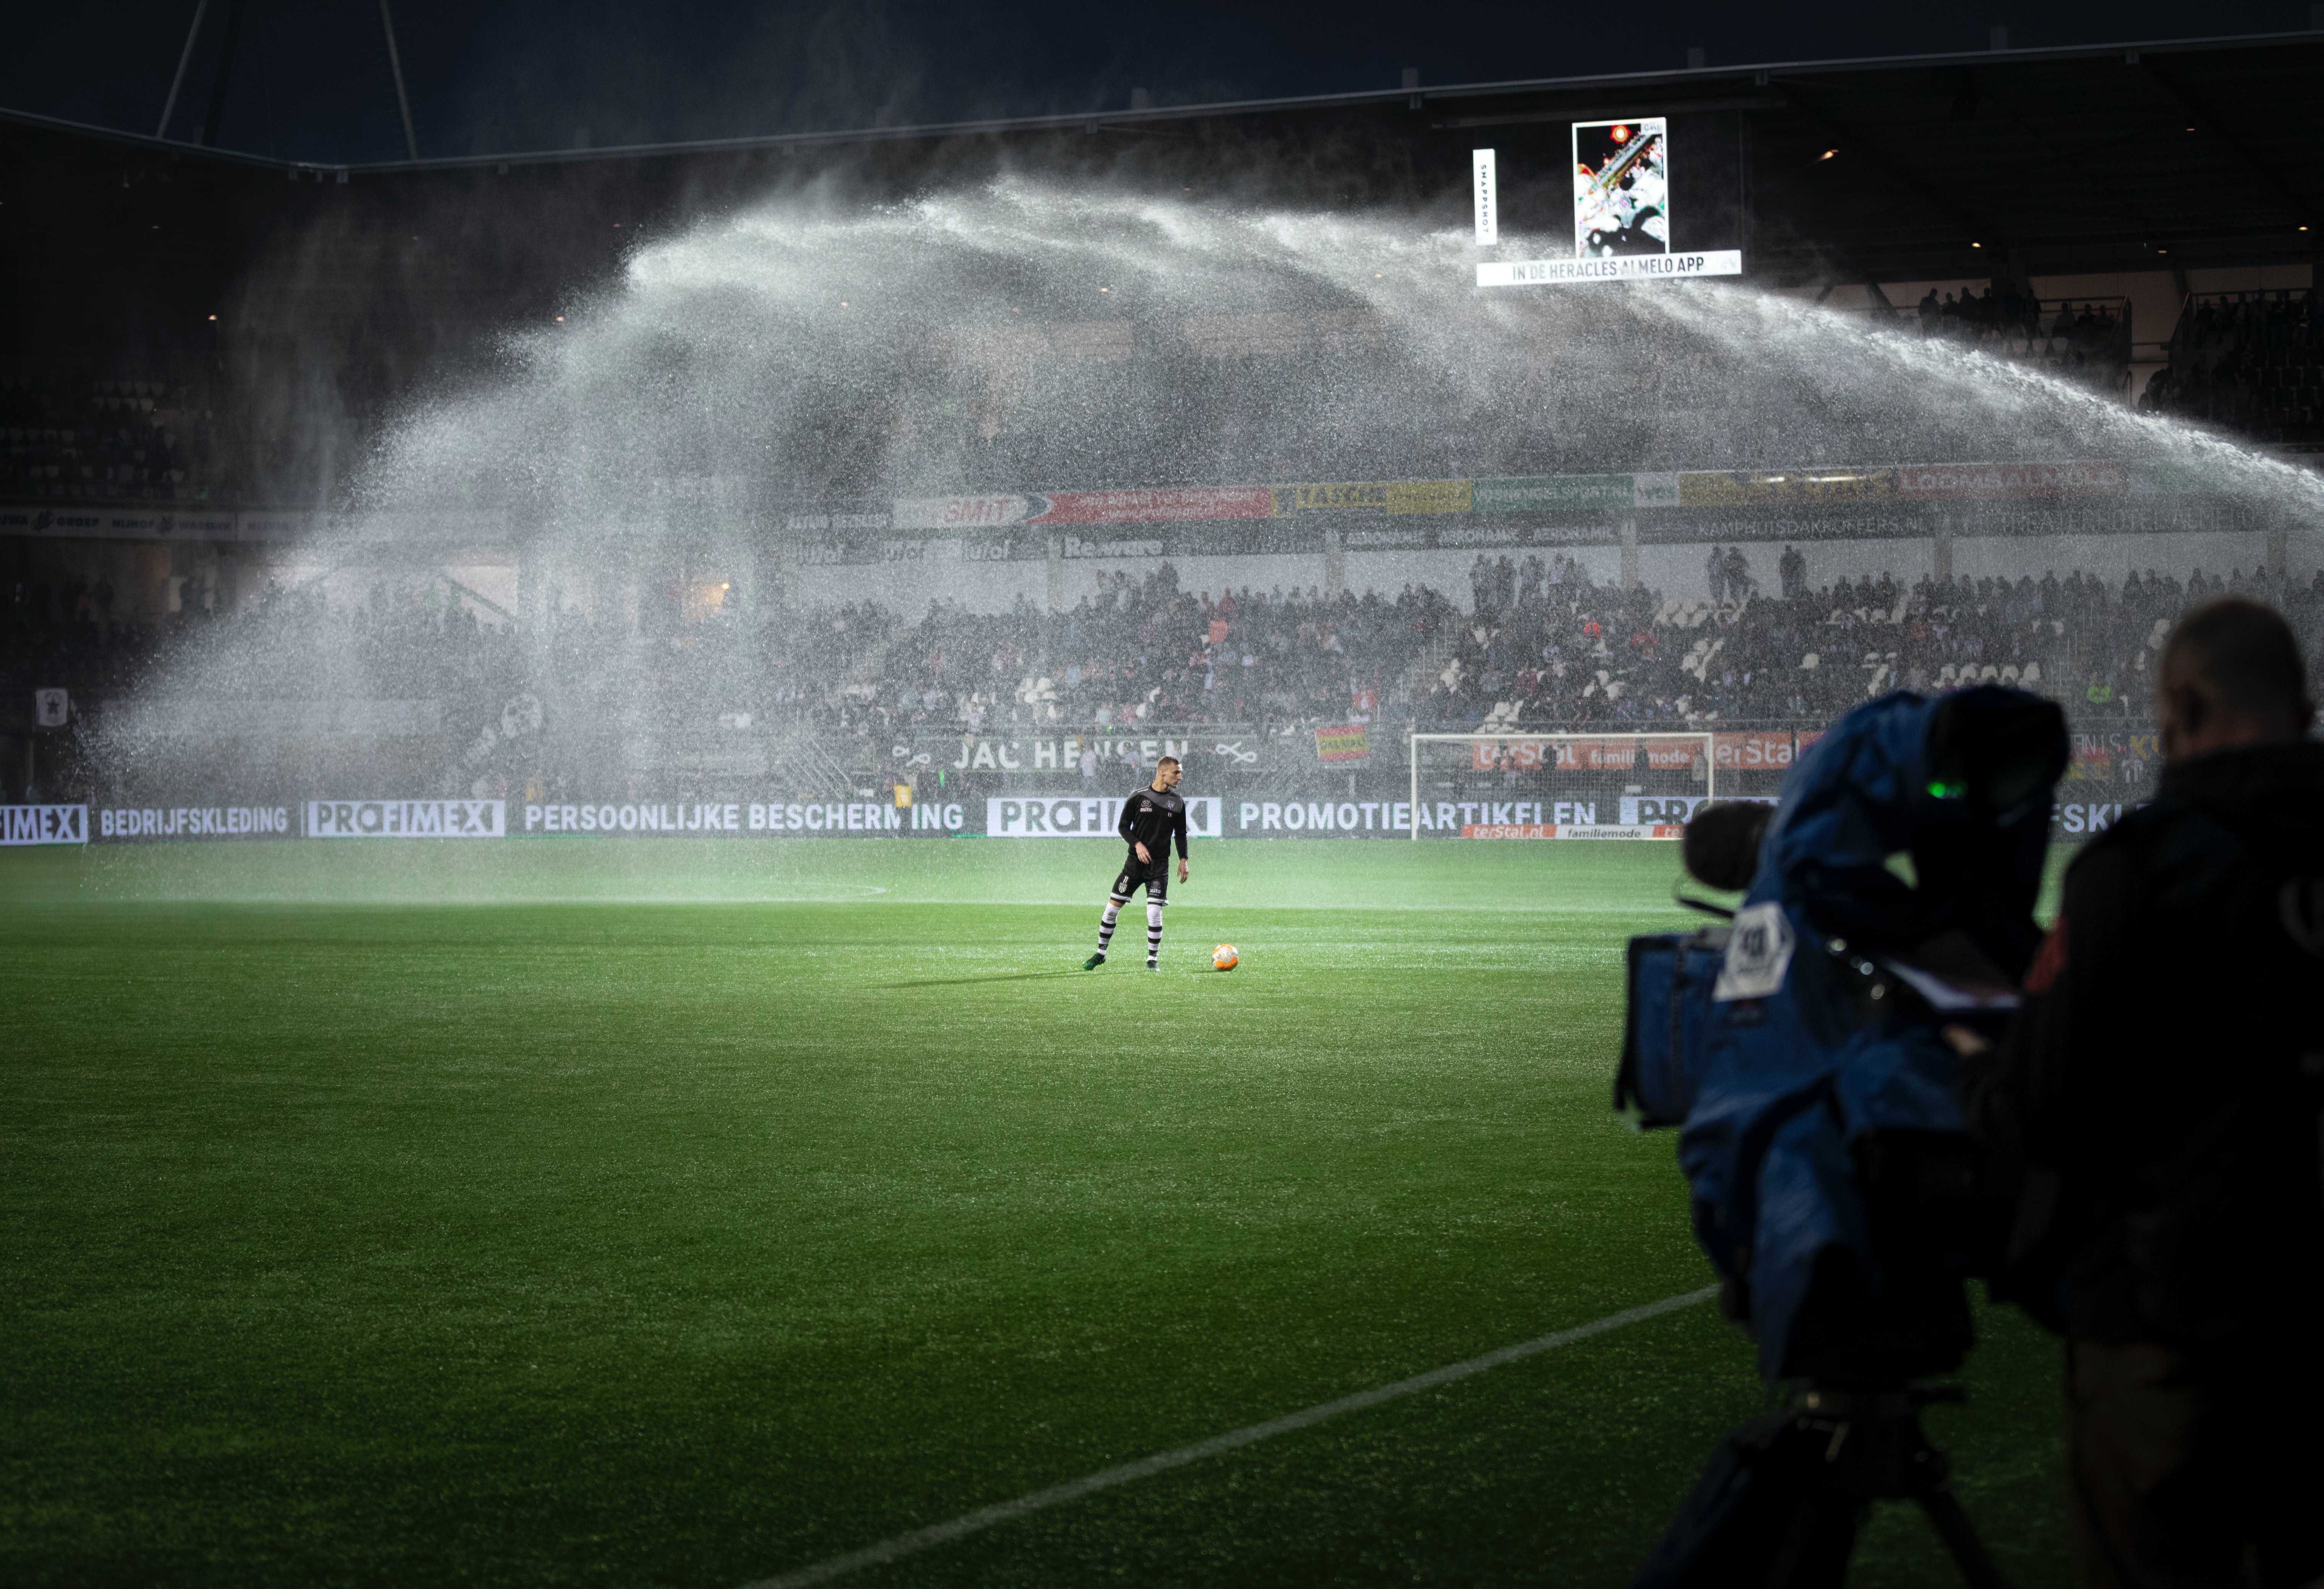 Football player on a pitch with water spraying over the top